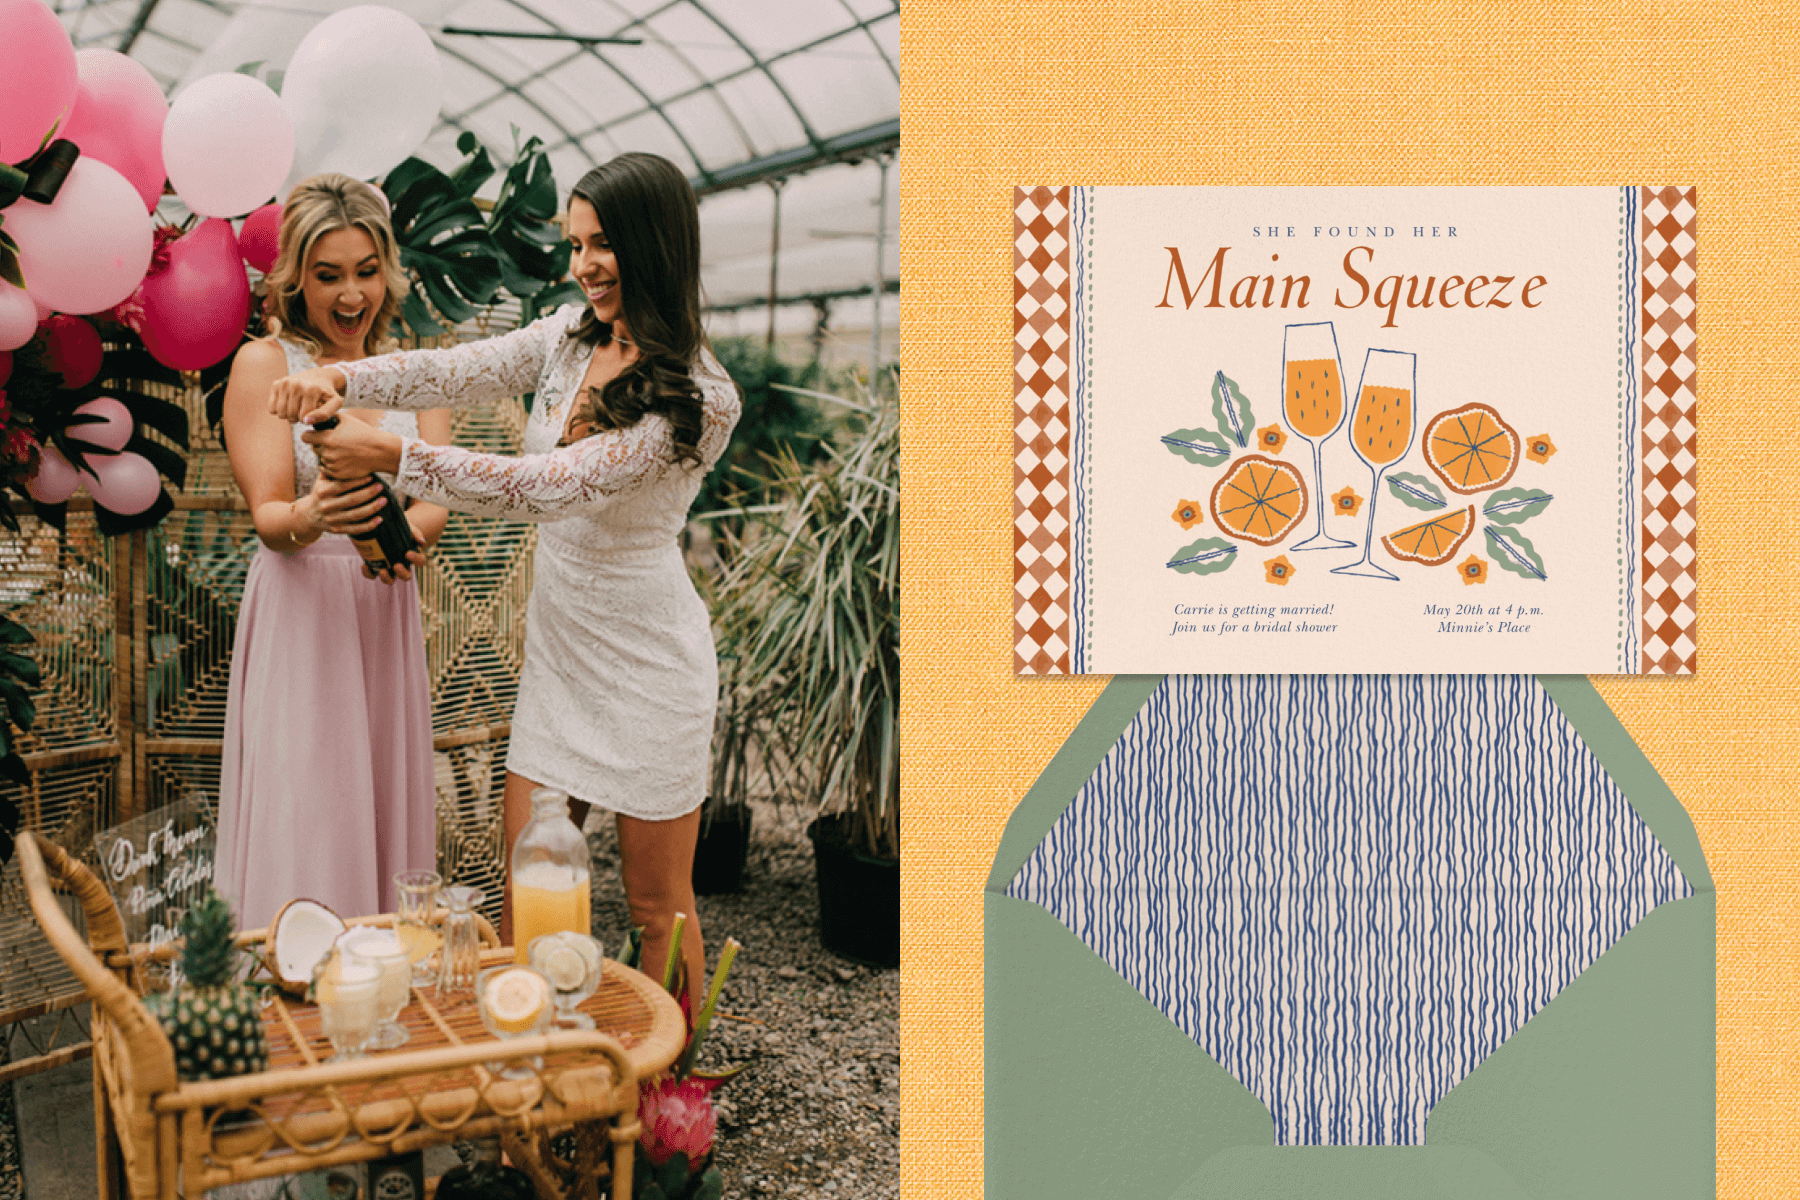 Left: Two women (one in a lacy white dress) open a bottle of sparkling wine over a rattan bar cart with pink balloons in what appears to be a greenhouse. Right: A bridal shower invitation with an illustration of orange slices and mimosas and a border of red checkers above a sage green envelope.